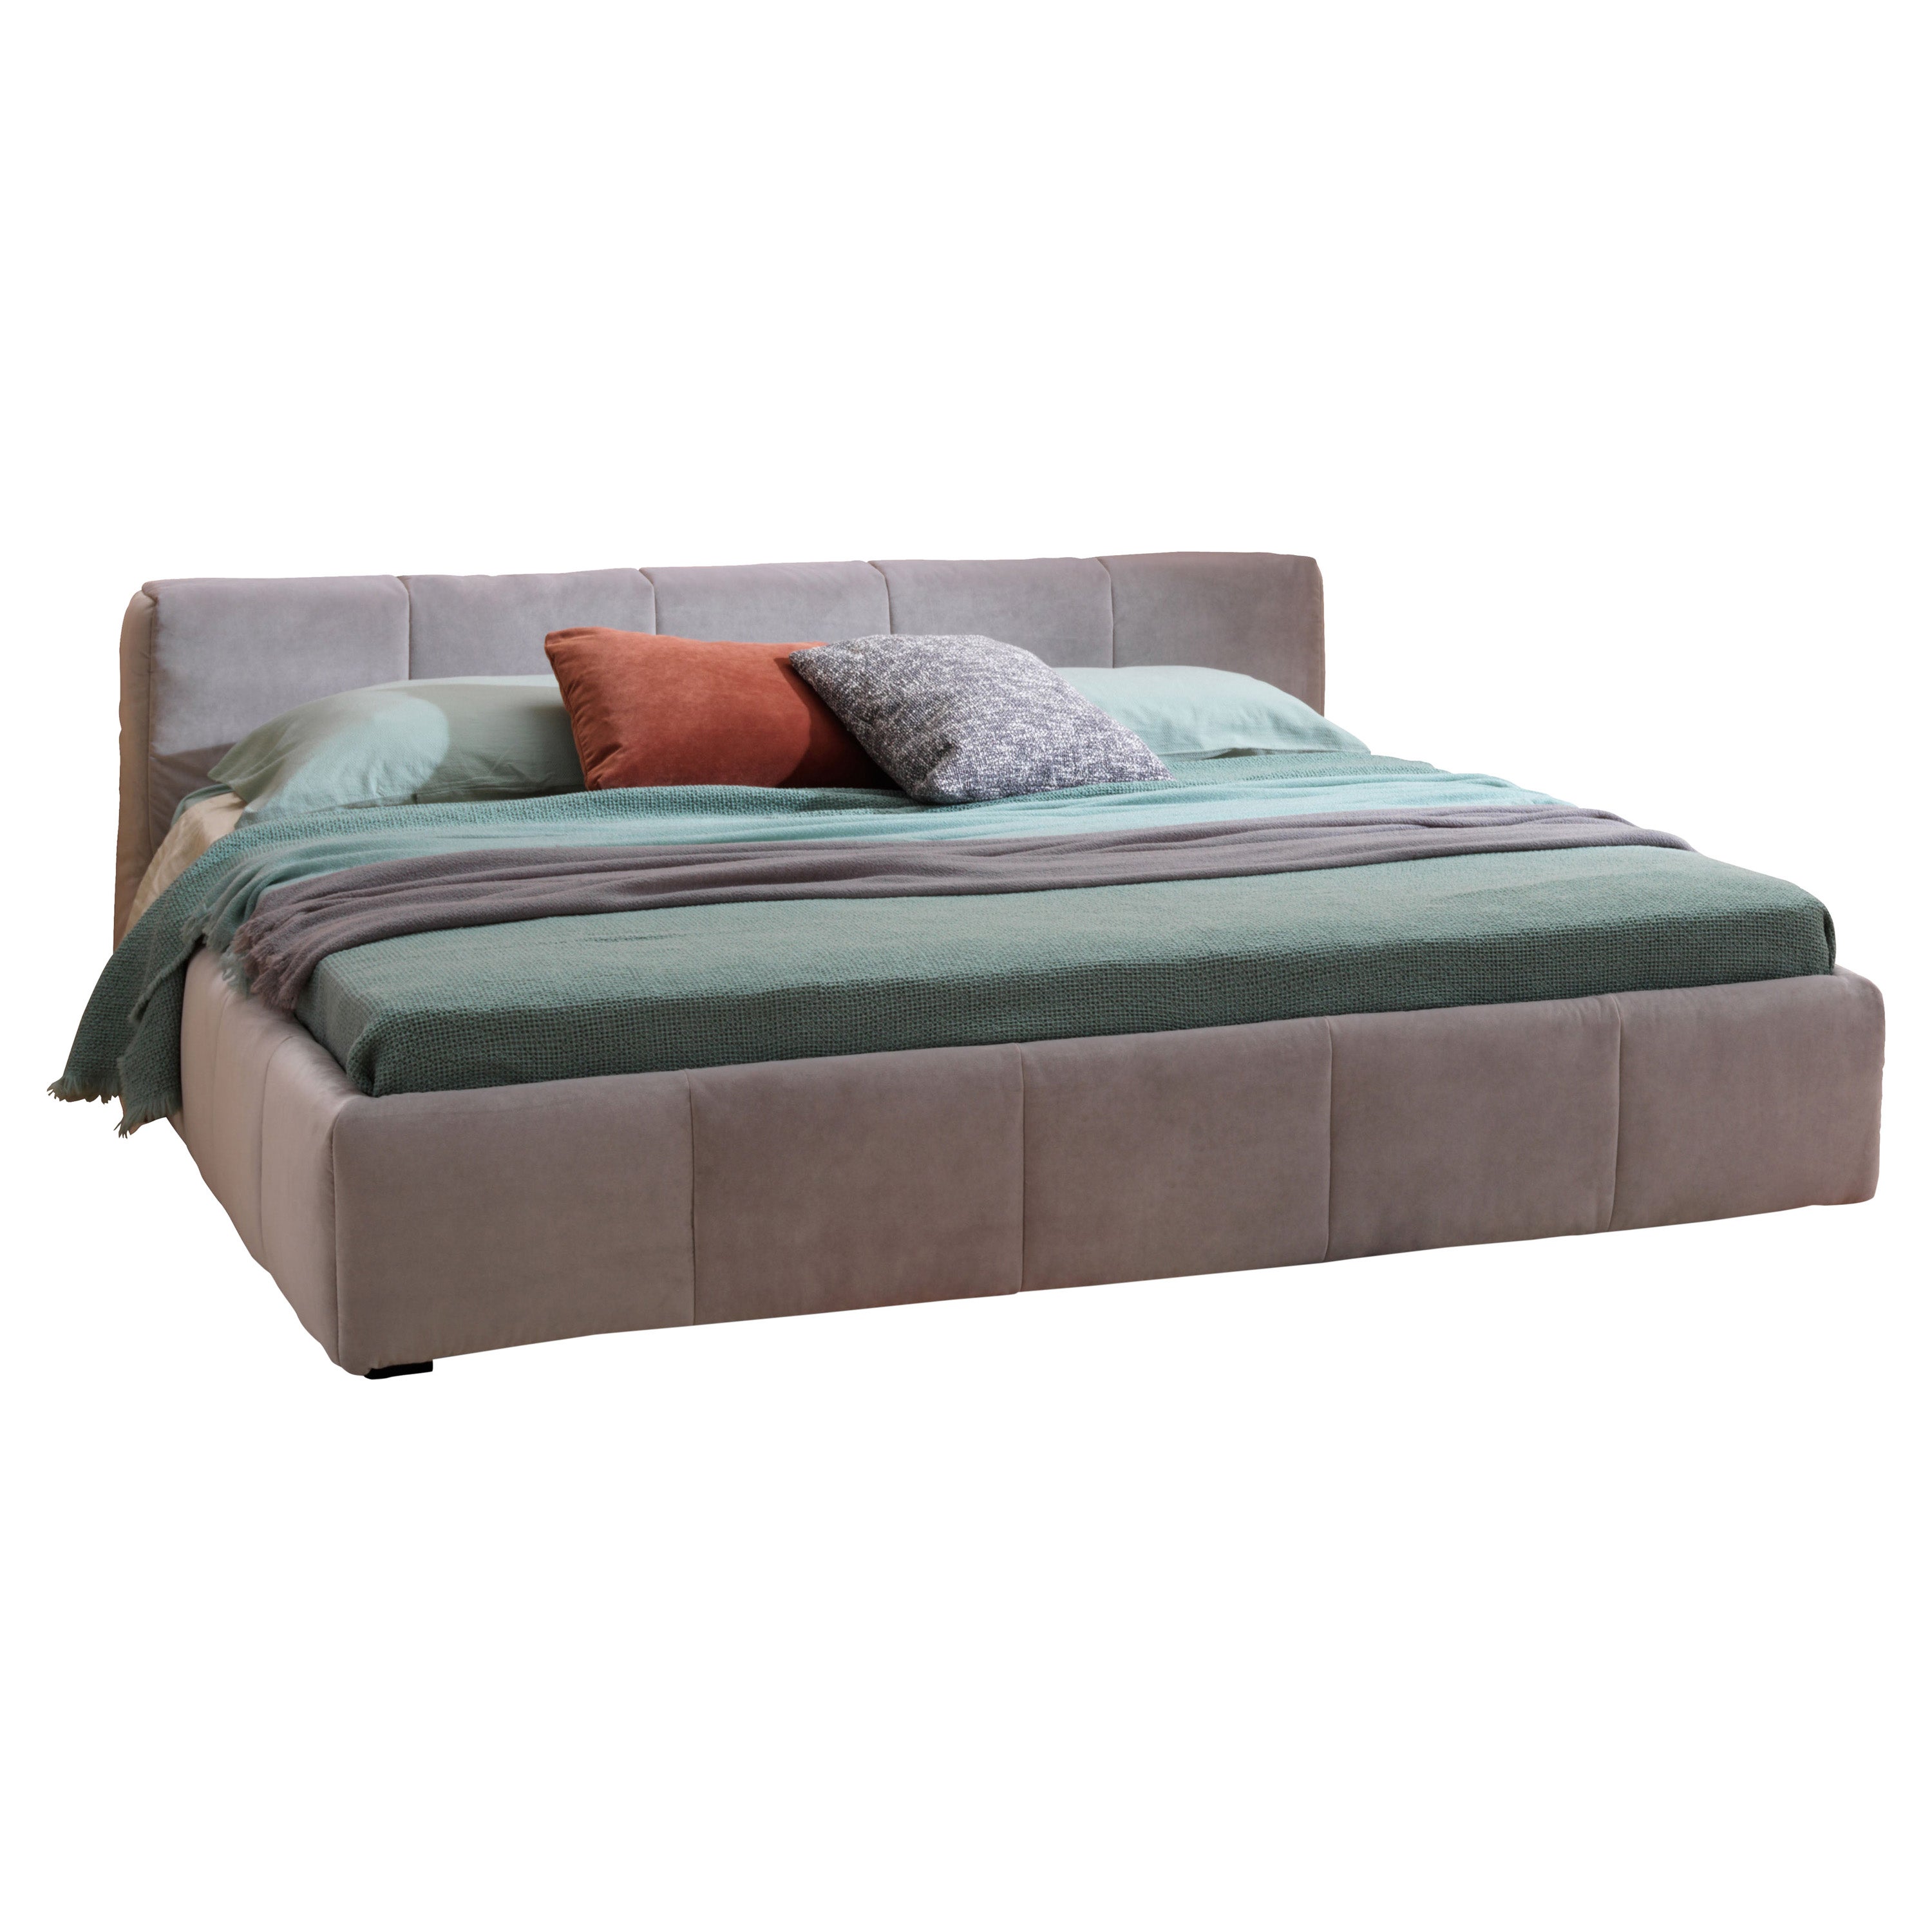 Pixel Box Queen Size Bed in Velvet Upholstery with Base by Sergio Bicego